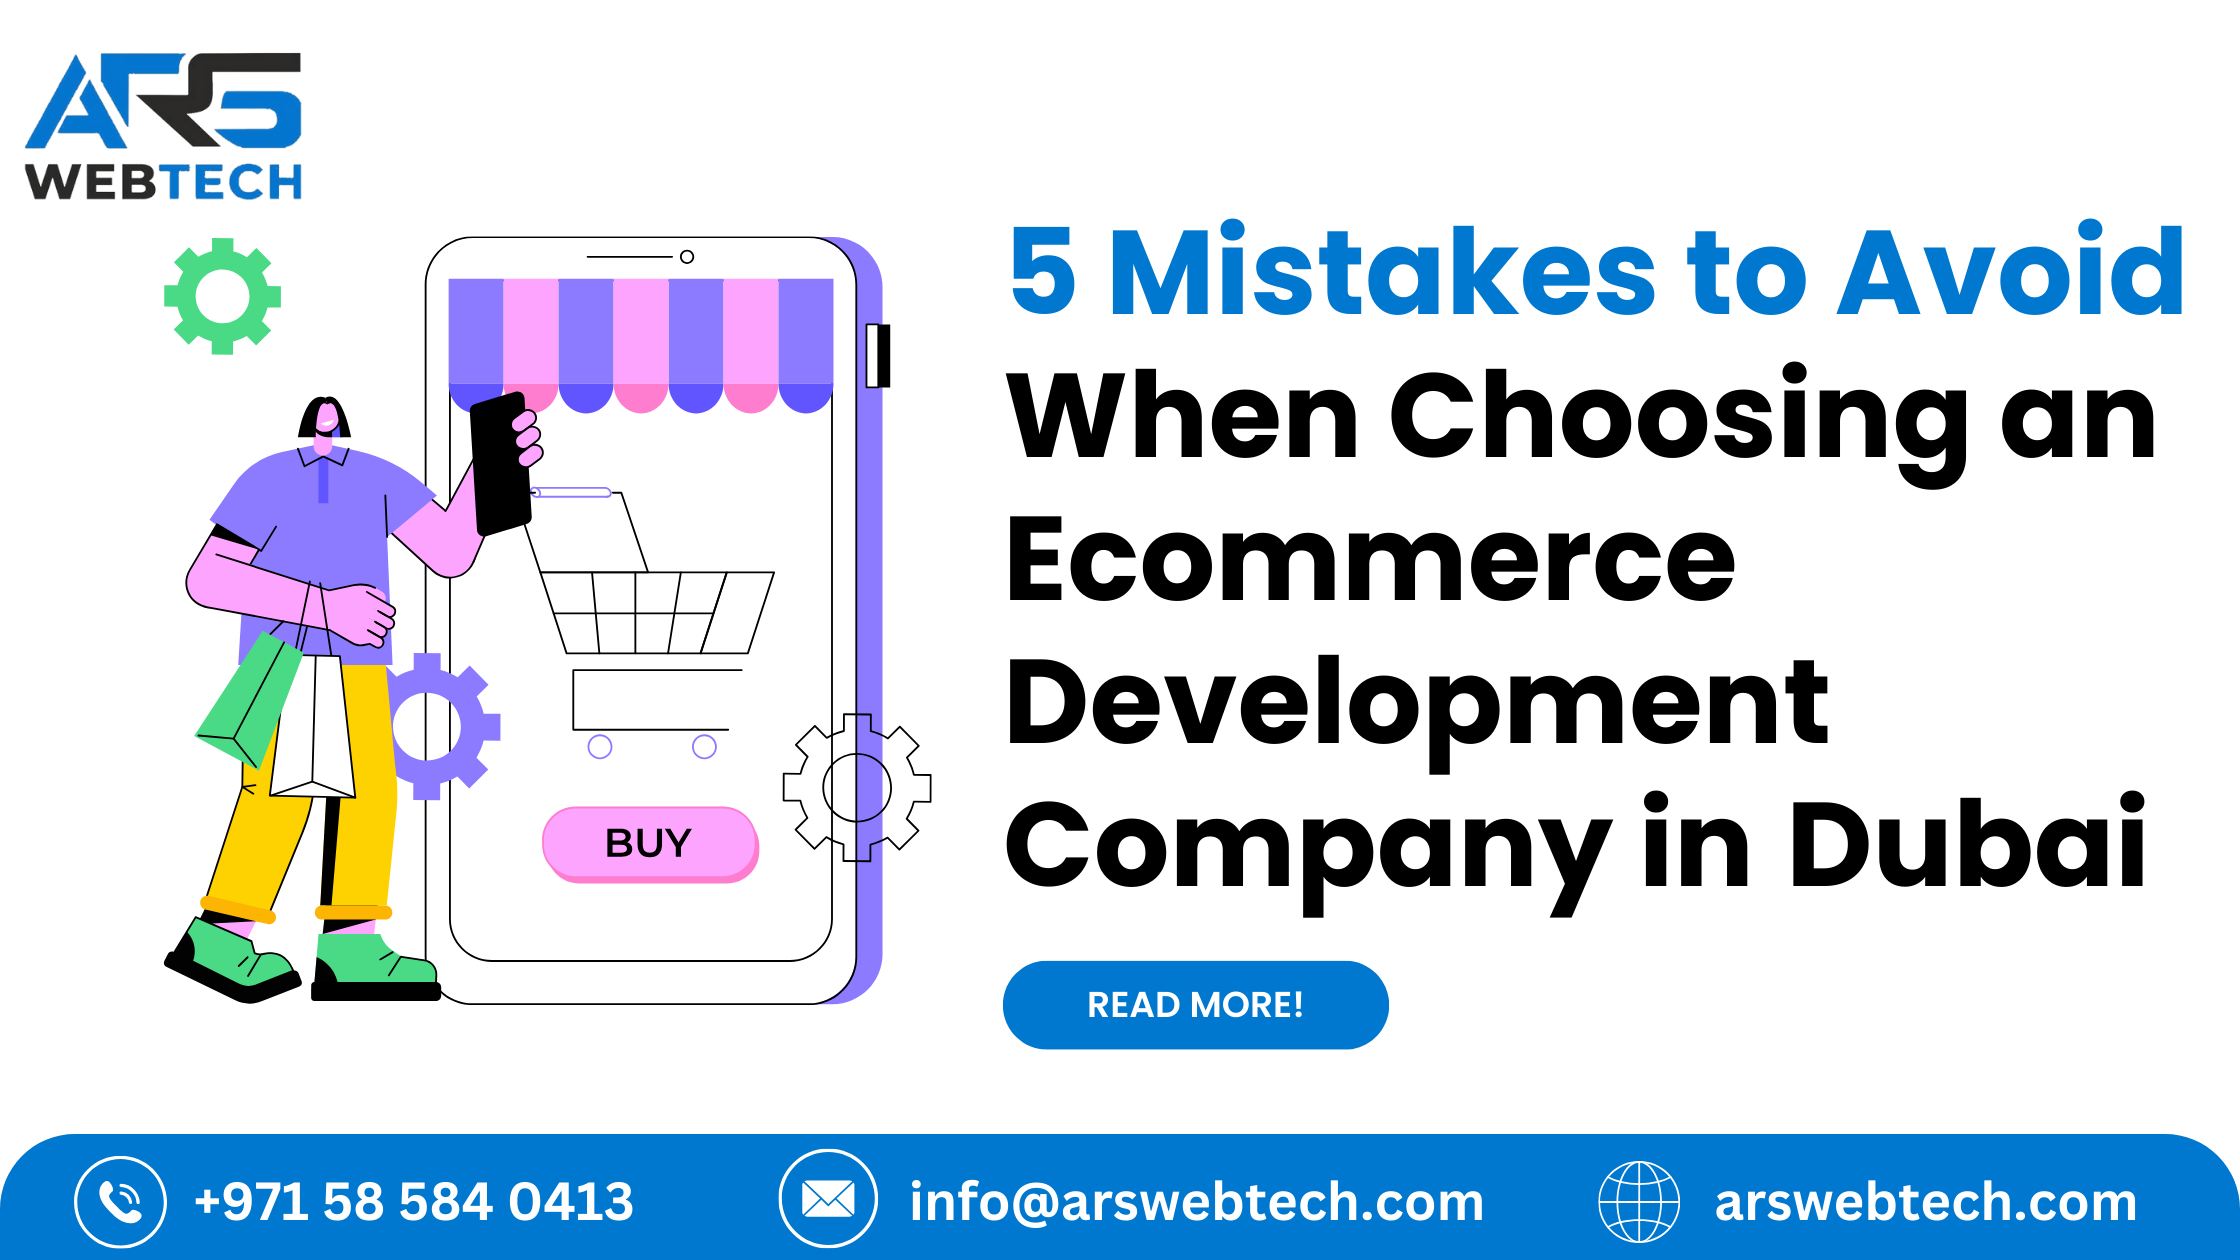 5 Mistakes to Avoid When Choosing an Ecommerce Development Company in Dubai